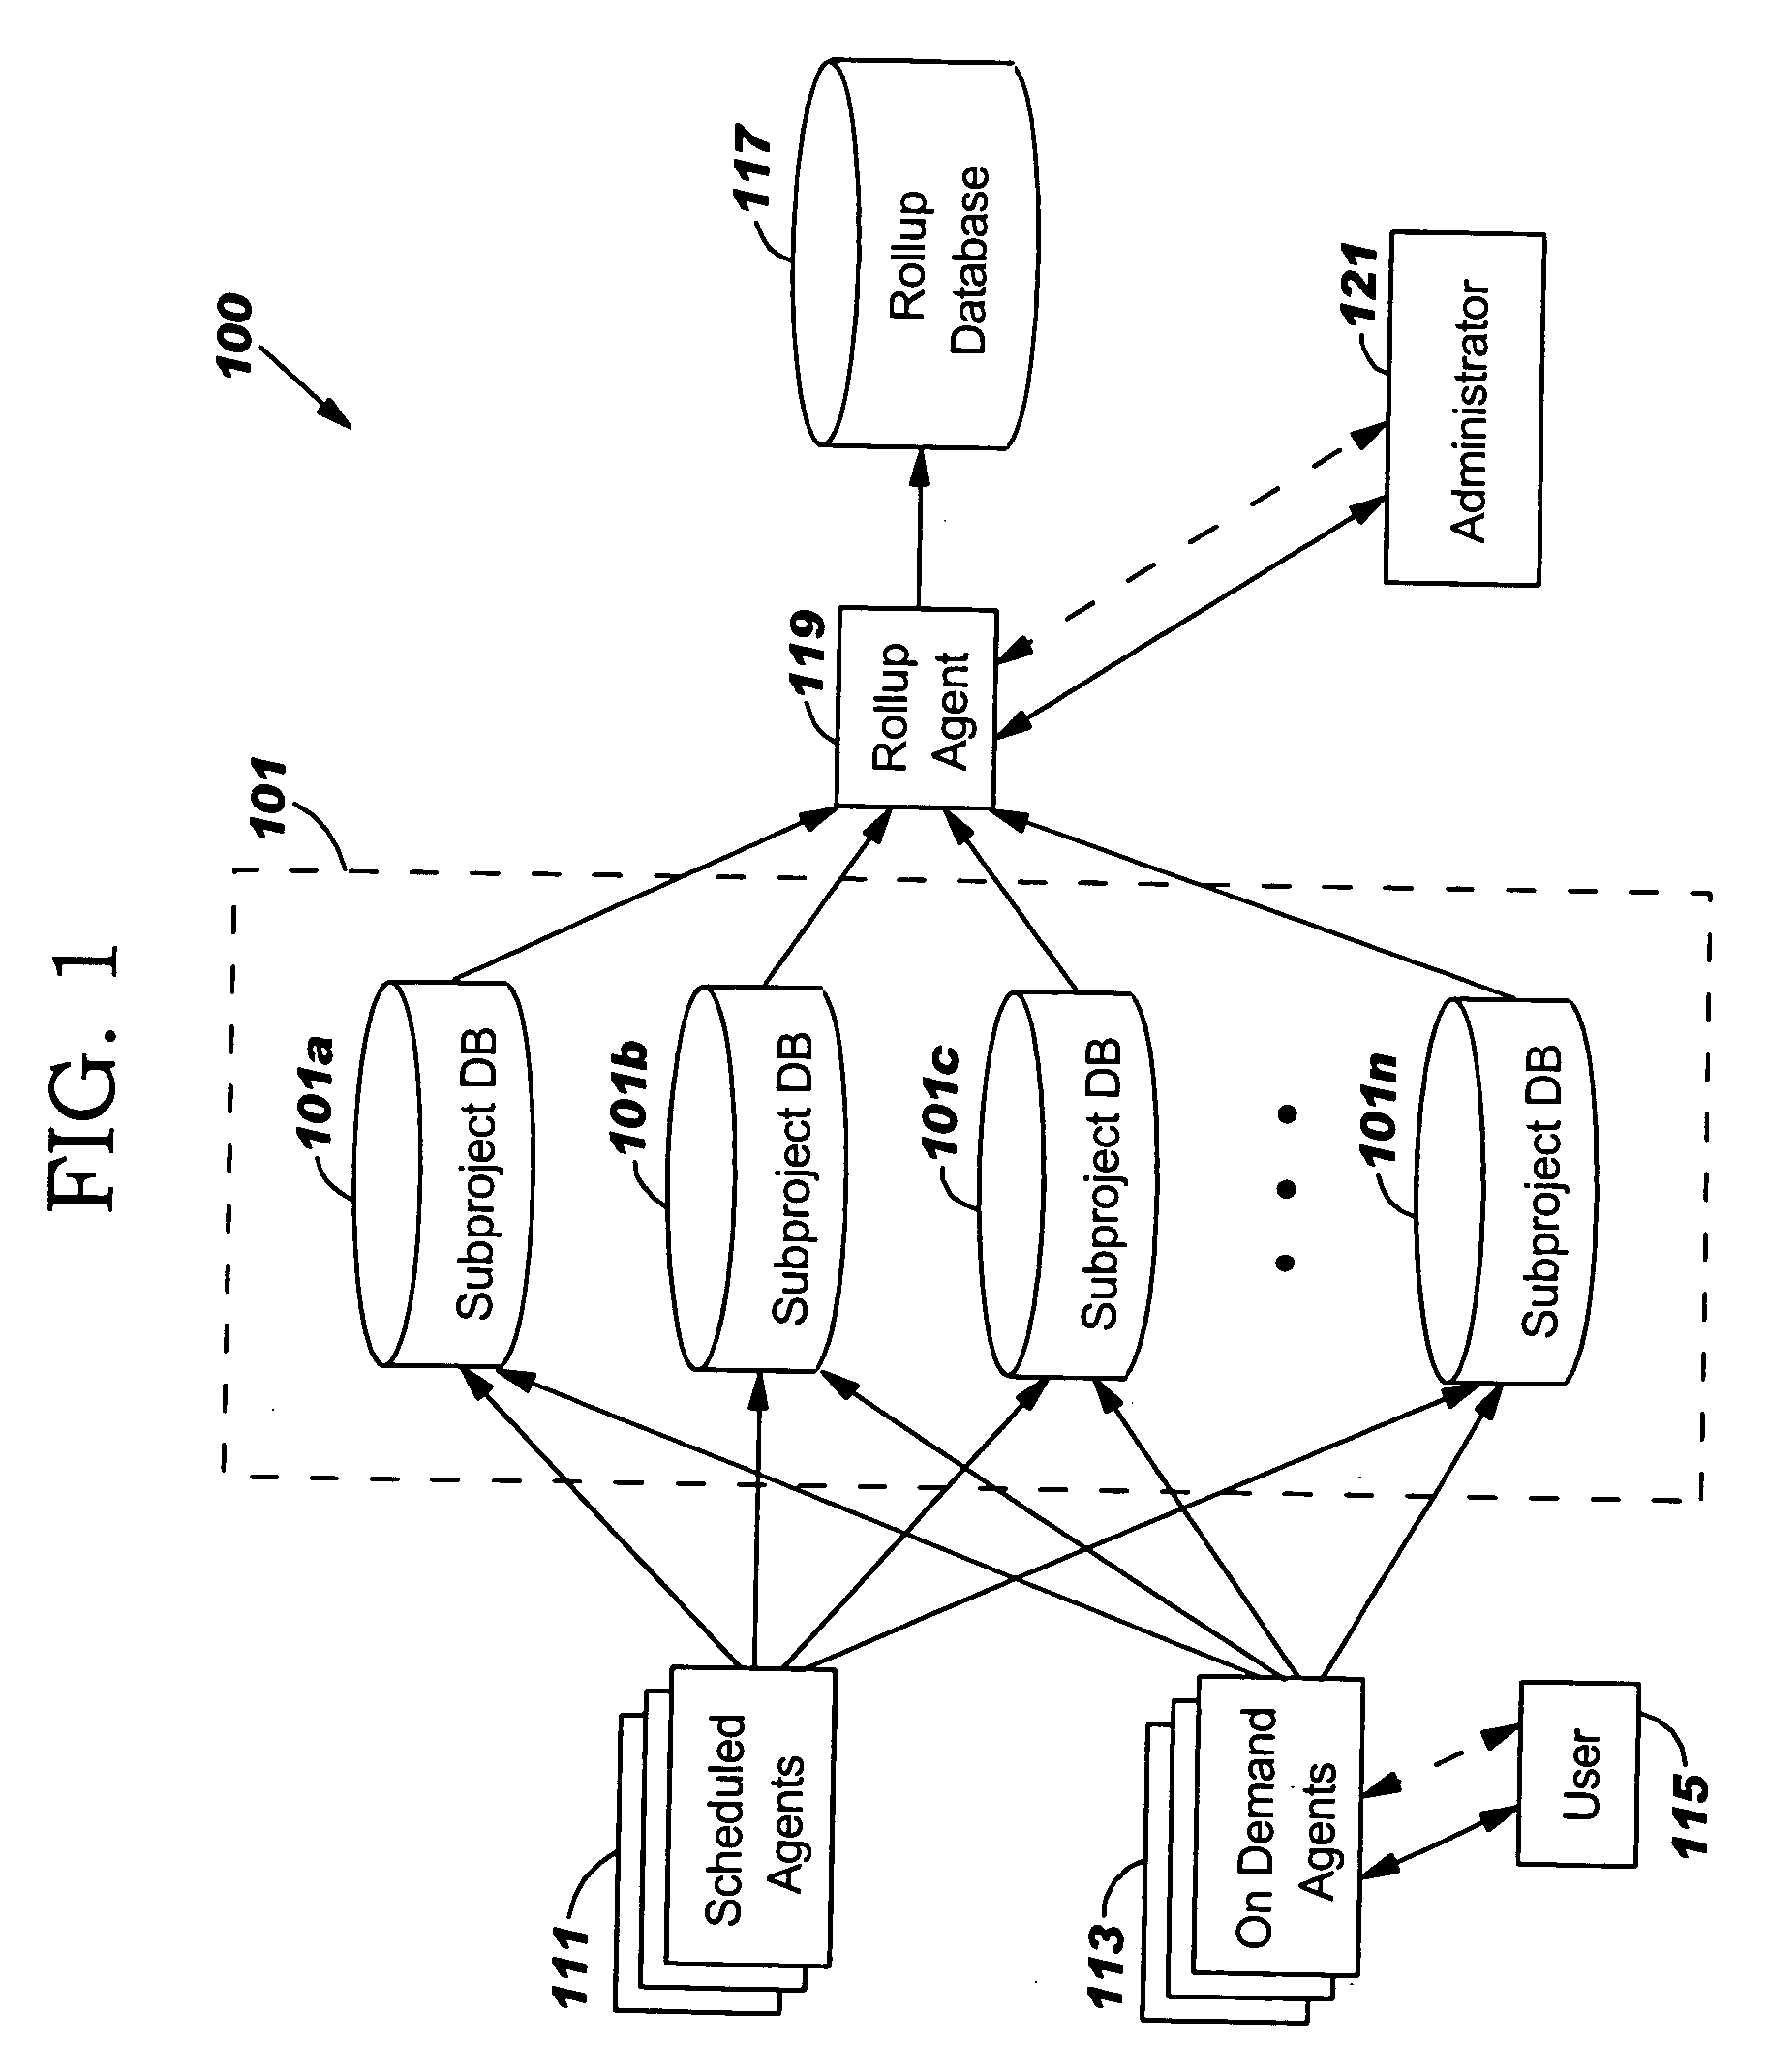 Method for providing both automated and on demand project performance measurements